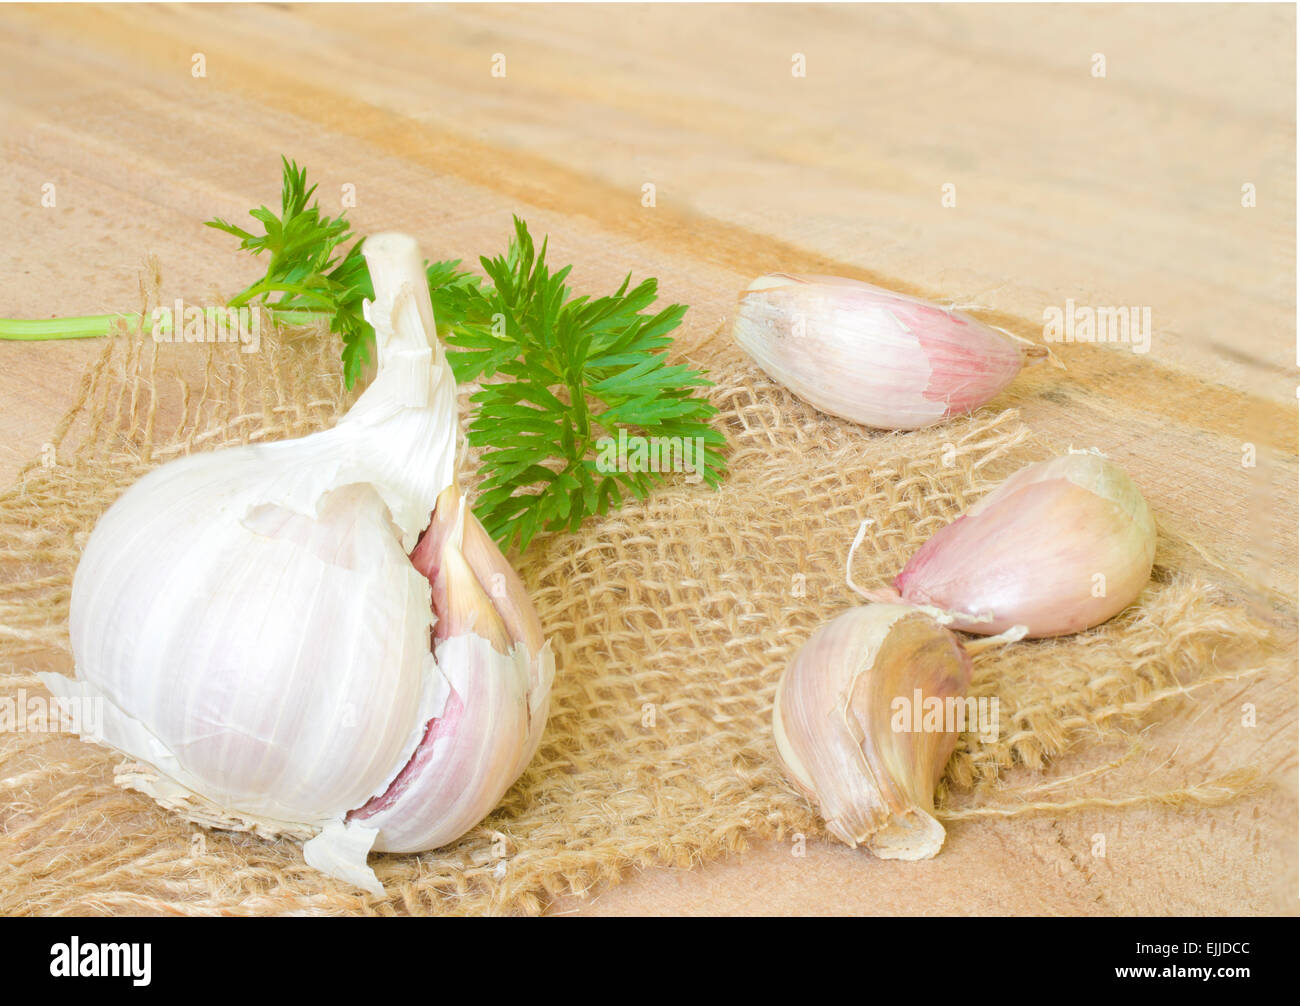 Garlic and parsley leaves on canvas isolated on wood Stock Photo